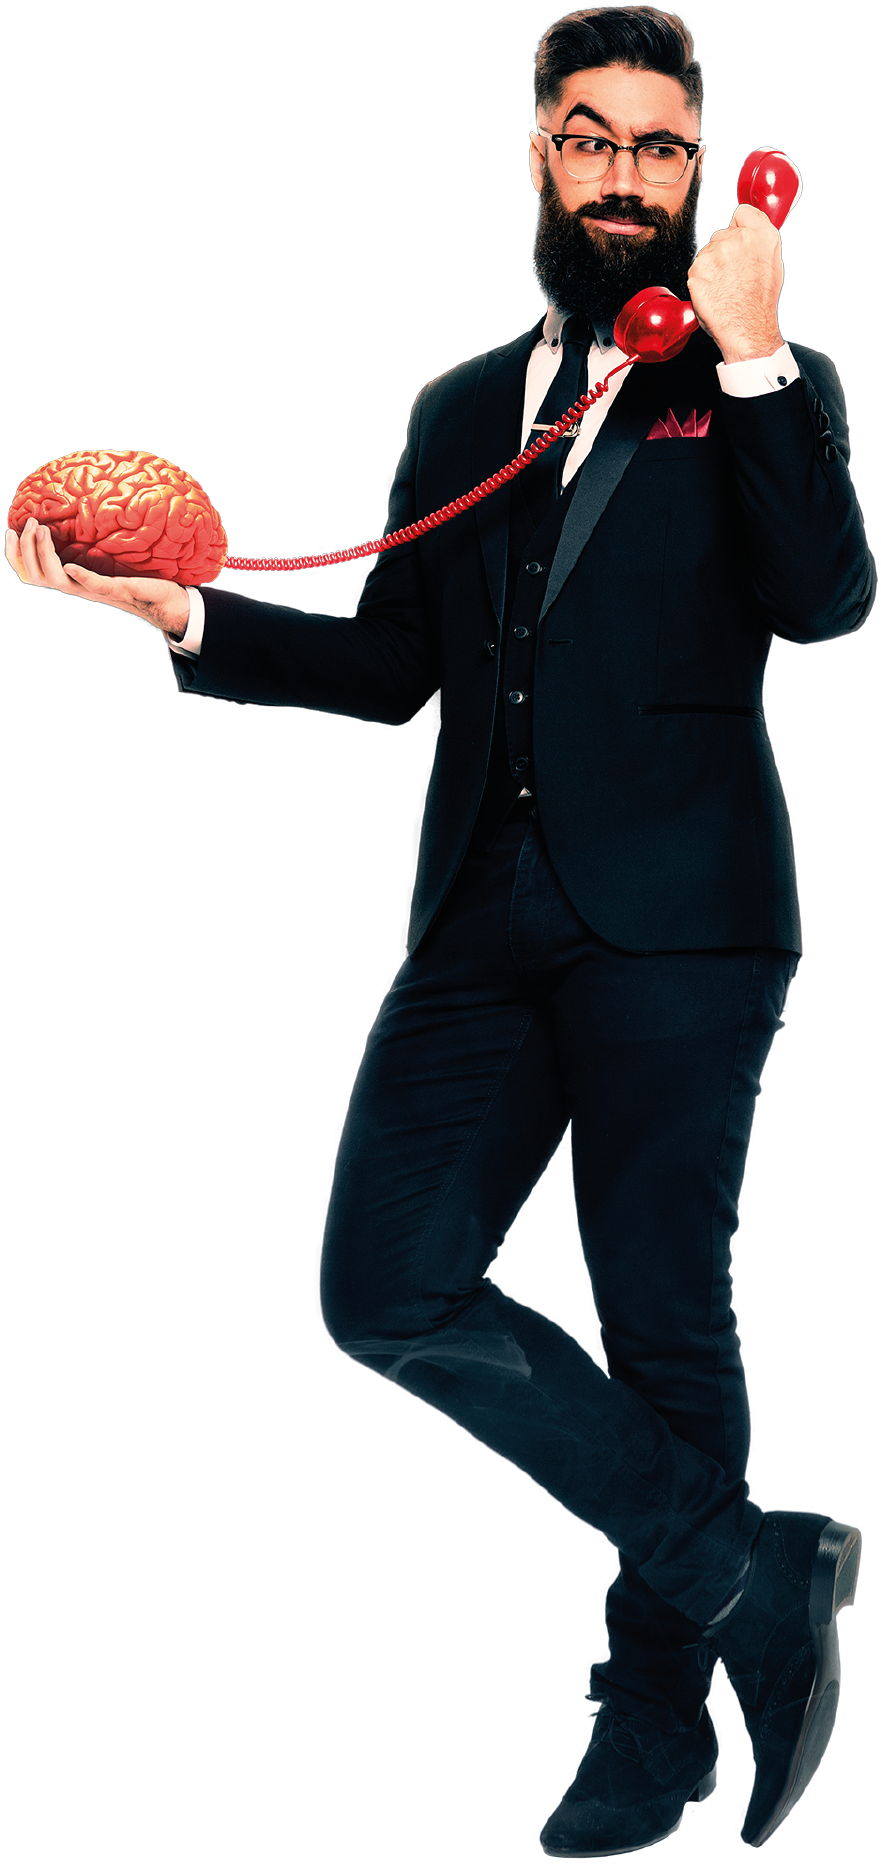 A Man In A Suit Holding A Phone To His Mouth And A Brain